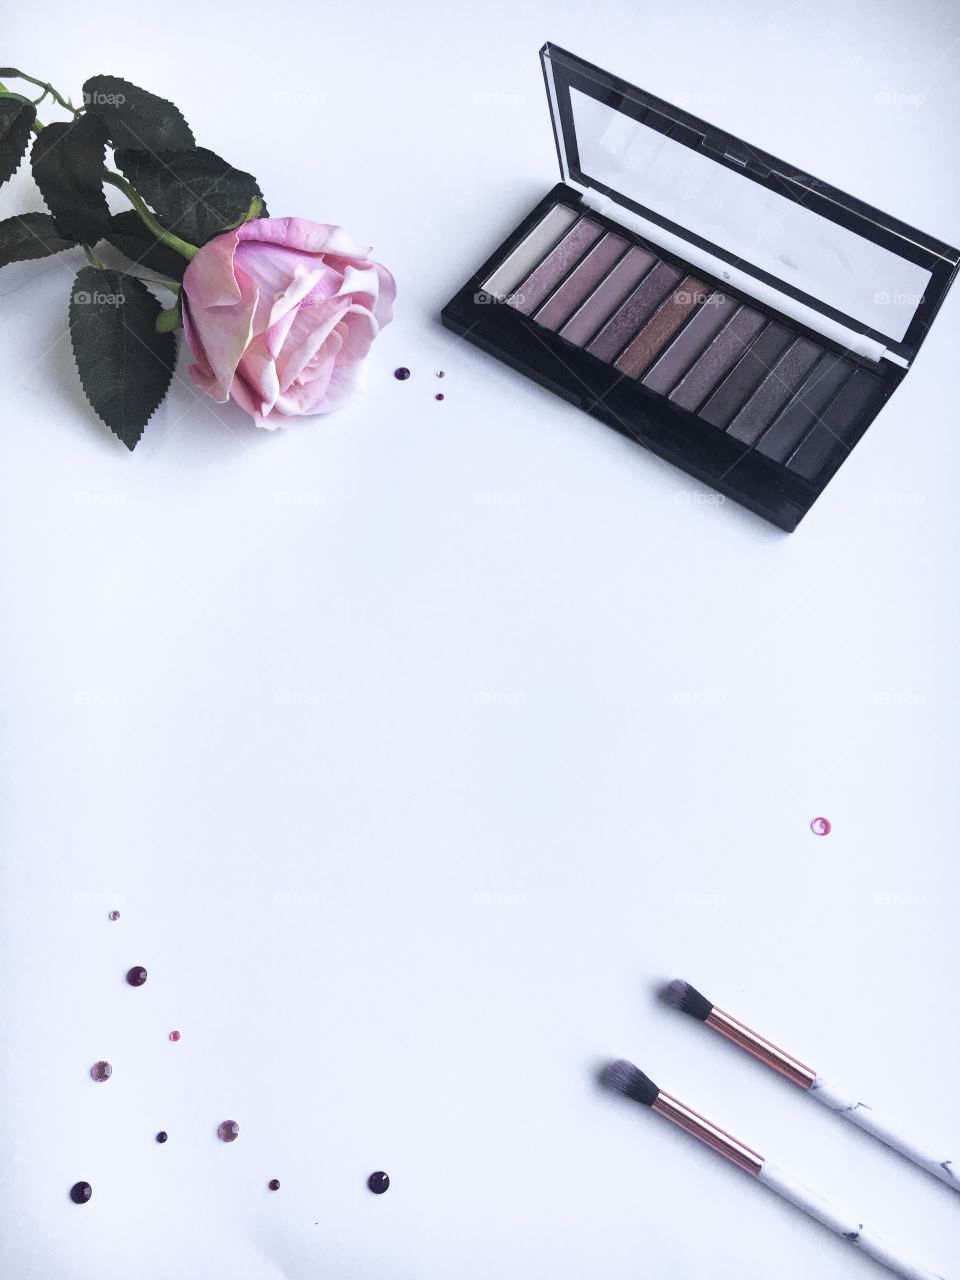 Makeup flat lay on a white background.